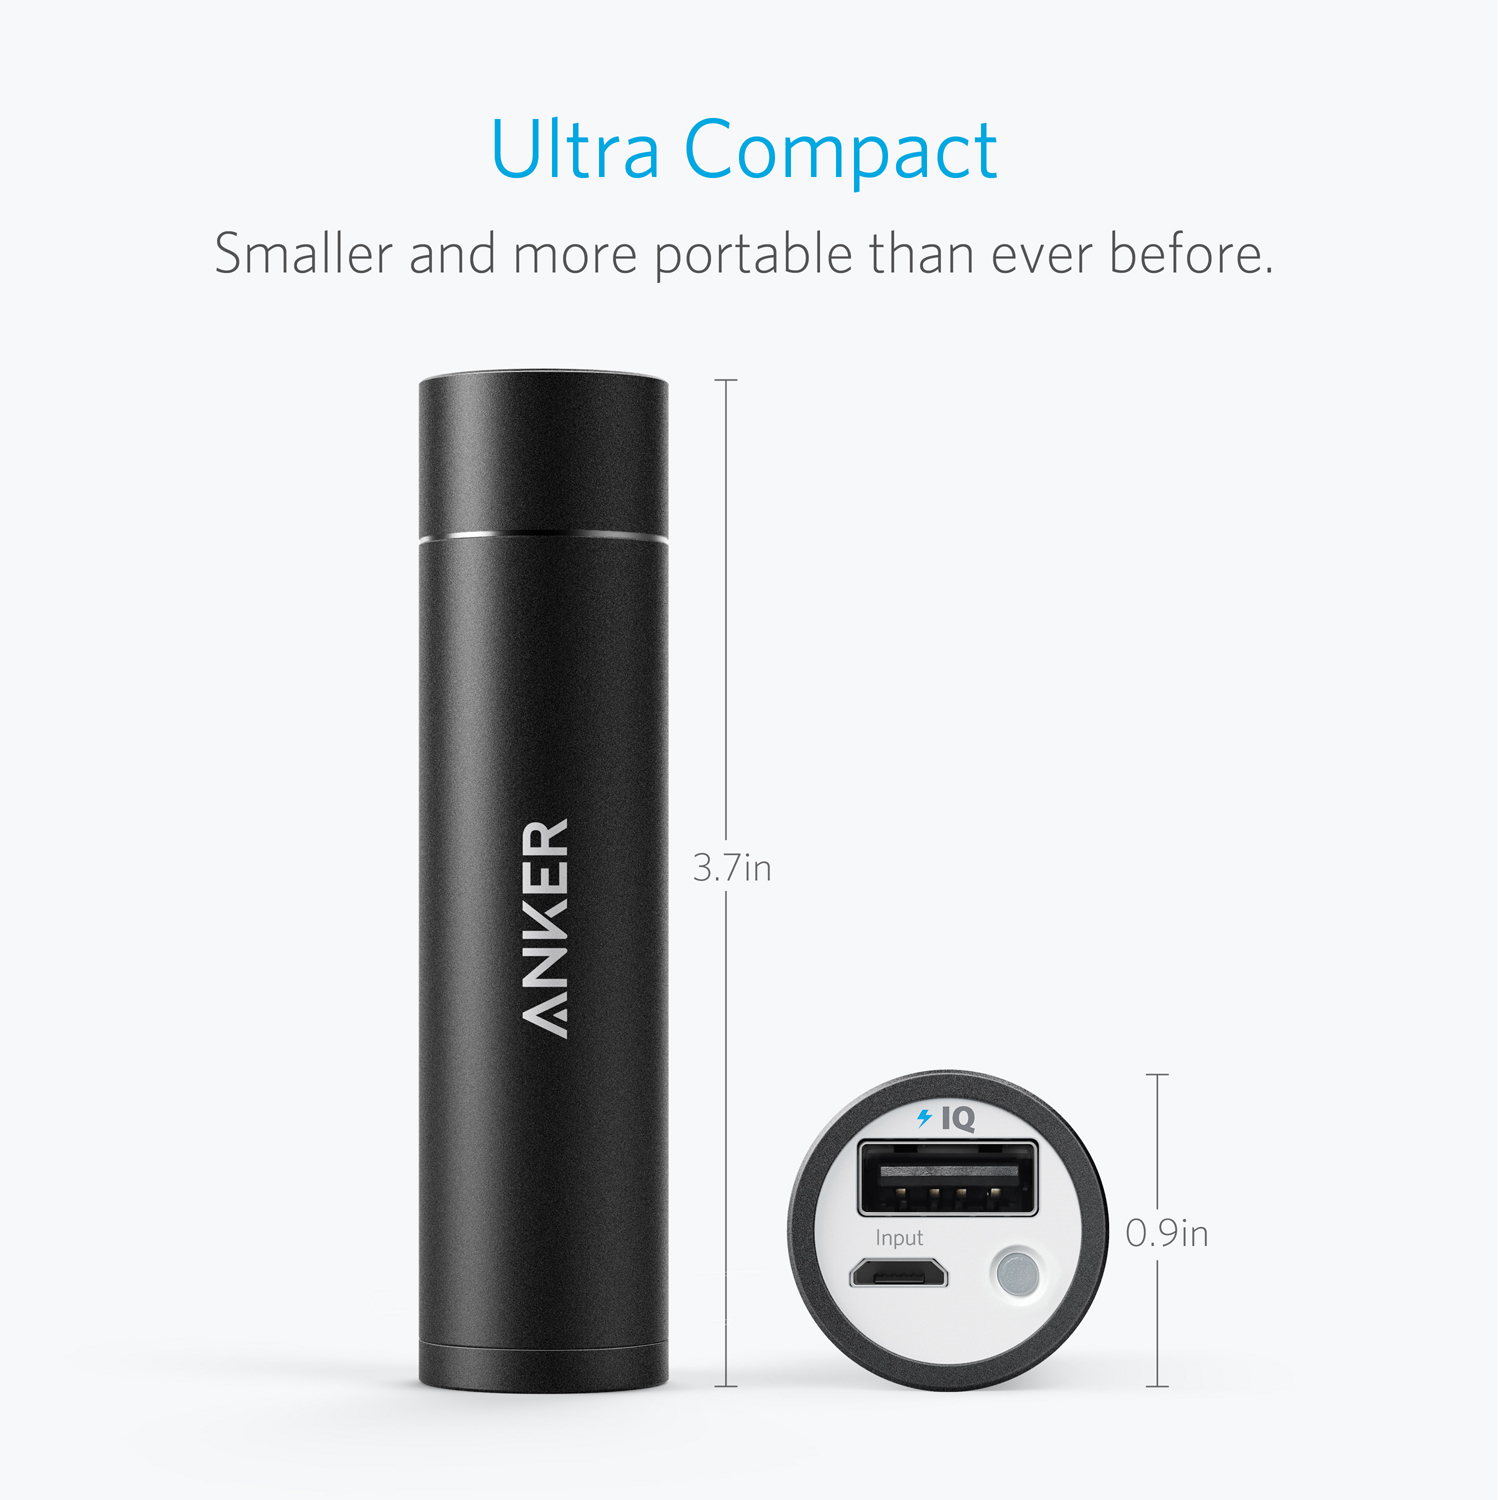 Anker PowerCore+ mini, 3350mAh Lipstick-Sized Portable Charger (3rd Generation, Premium Aluminum Power Bank), One of the Most Compact External Batteries - image 2 of 7